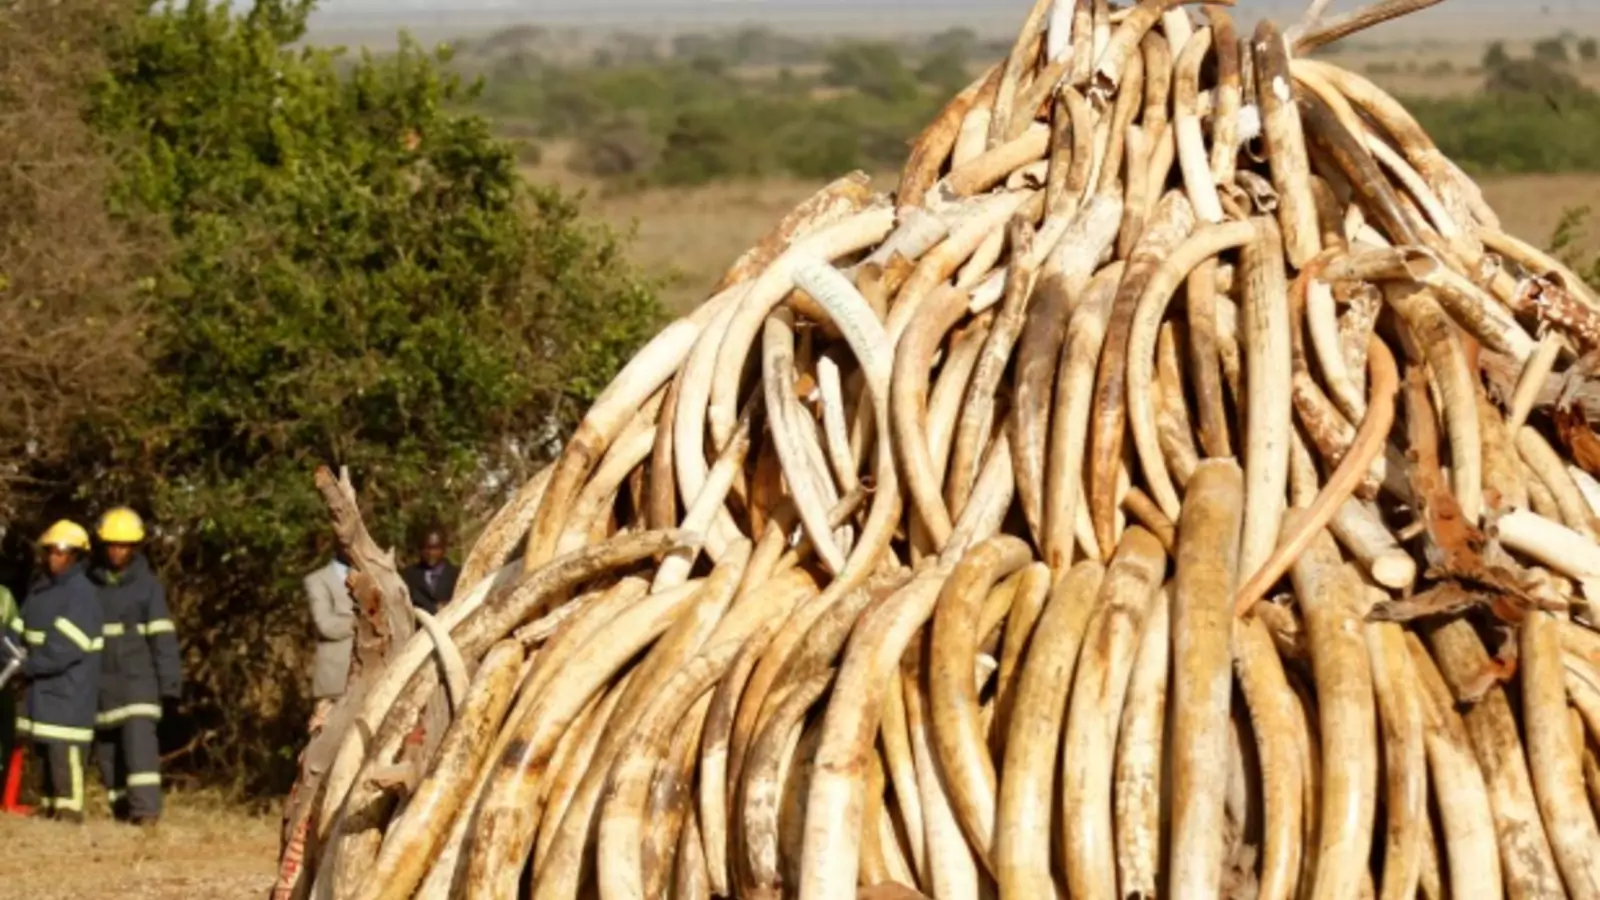 The Danger of False Narratives: Al-Shabaab's Faux Ivory Trade | Council on Foreign Relations